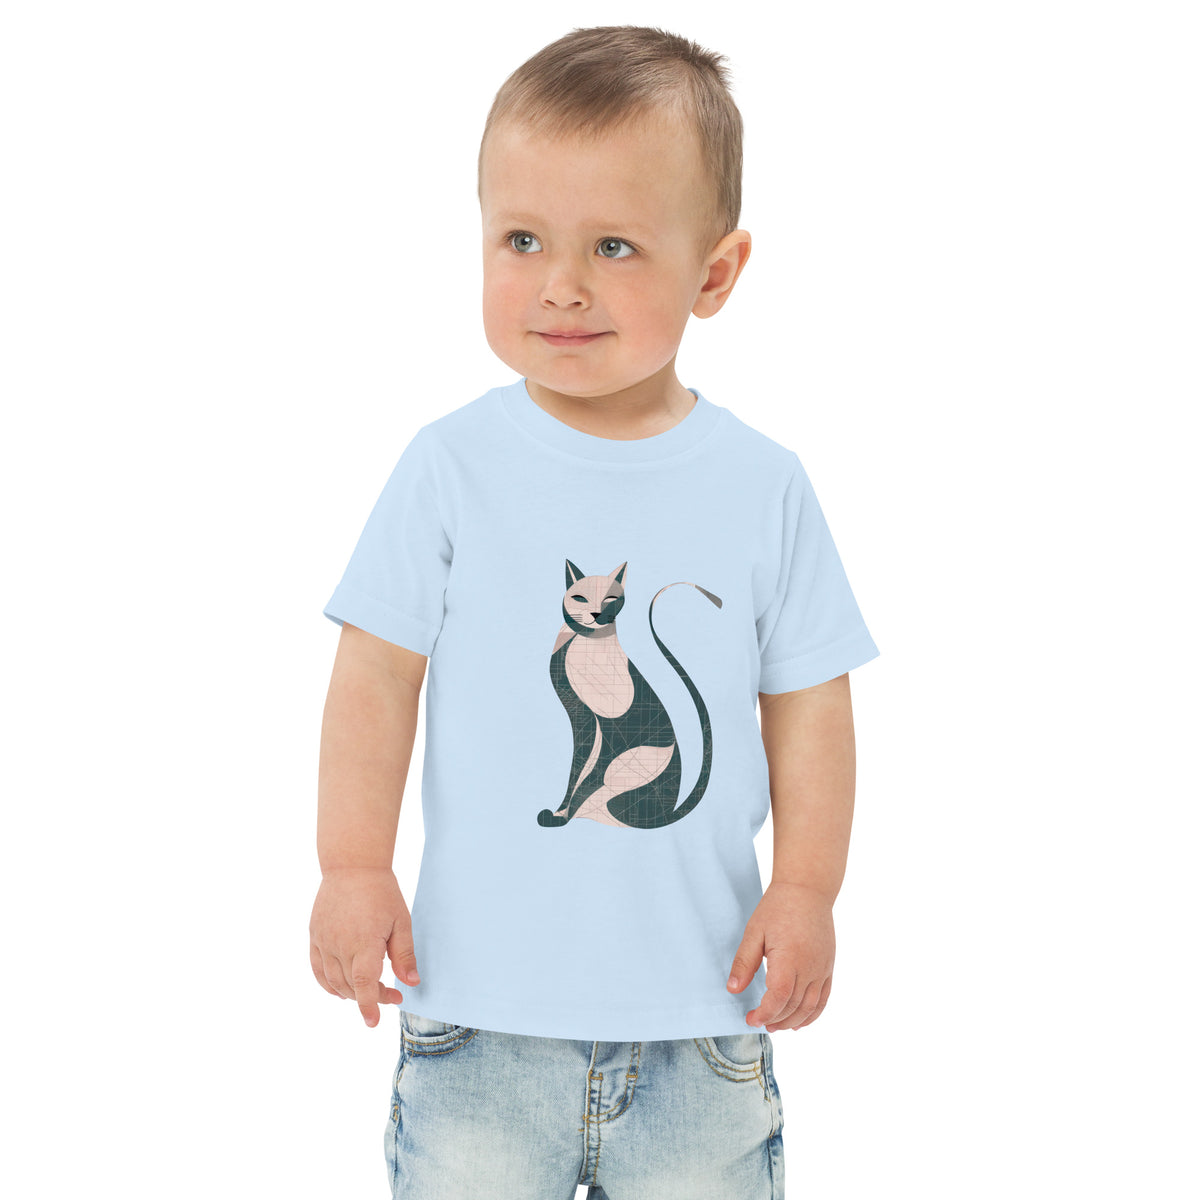 Kitty’s Nighttime Nuzzles Toddler T-Shirt